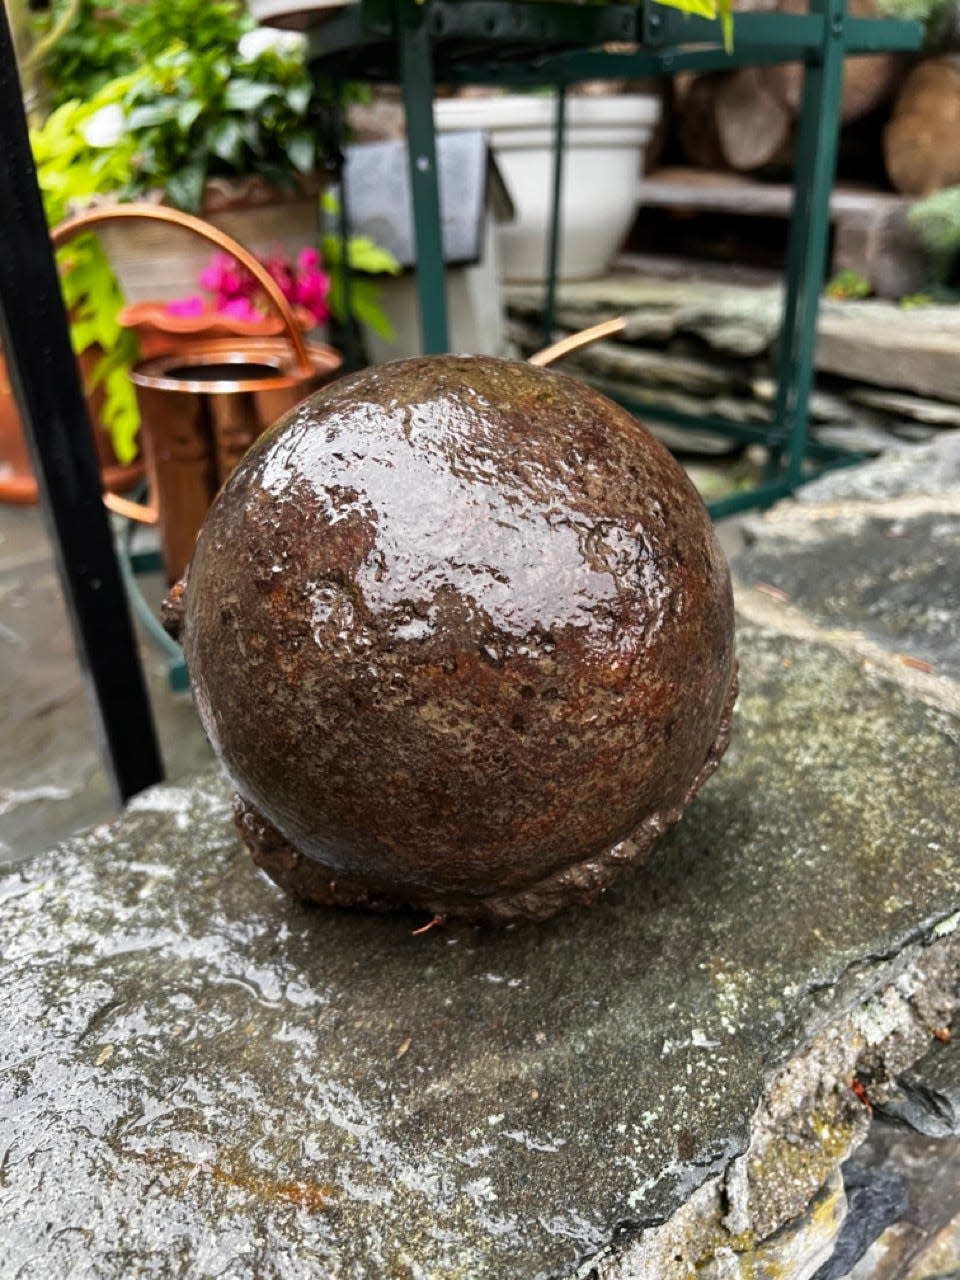 This 23-pound cannonball was found on the property of the John Bliss House in Newport.